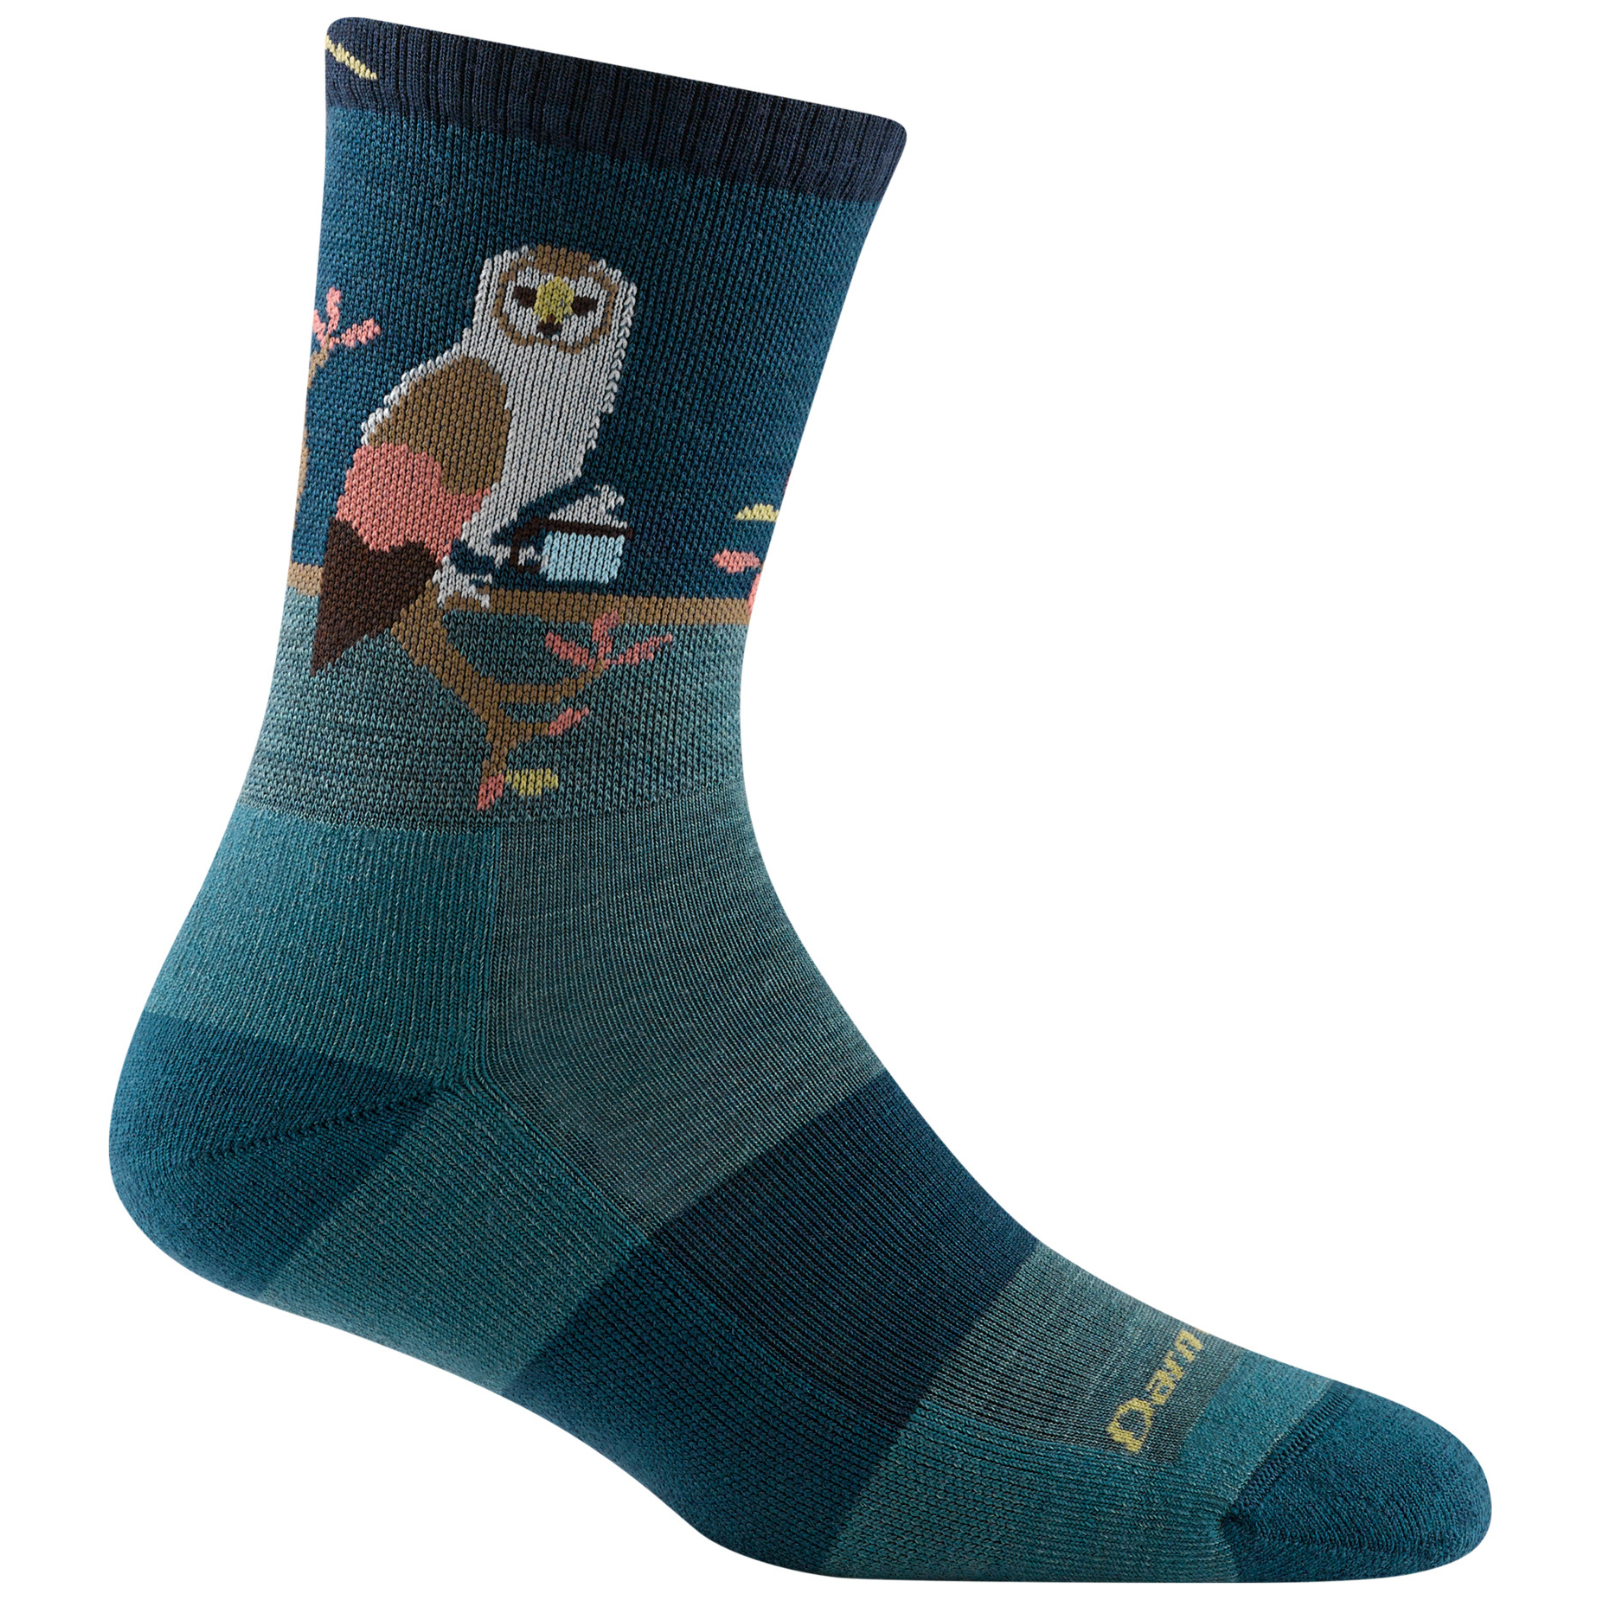 Darn Tough 5001 Critter Club Micro Crew Lightweight Hiking Women's Sock featuring teal sock with owl holding a cup of coffee on display foot